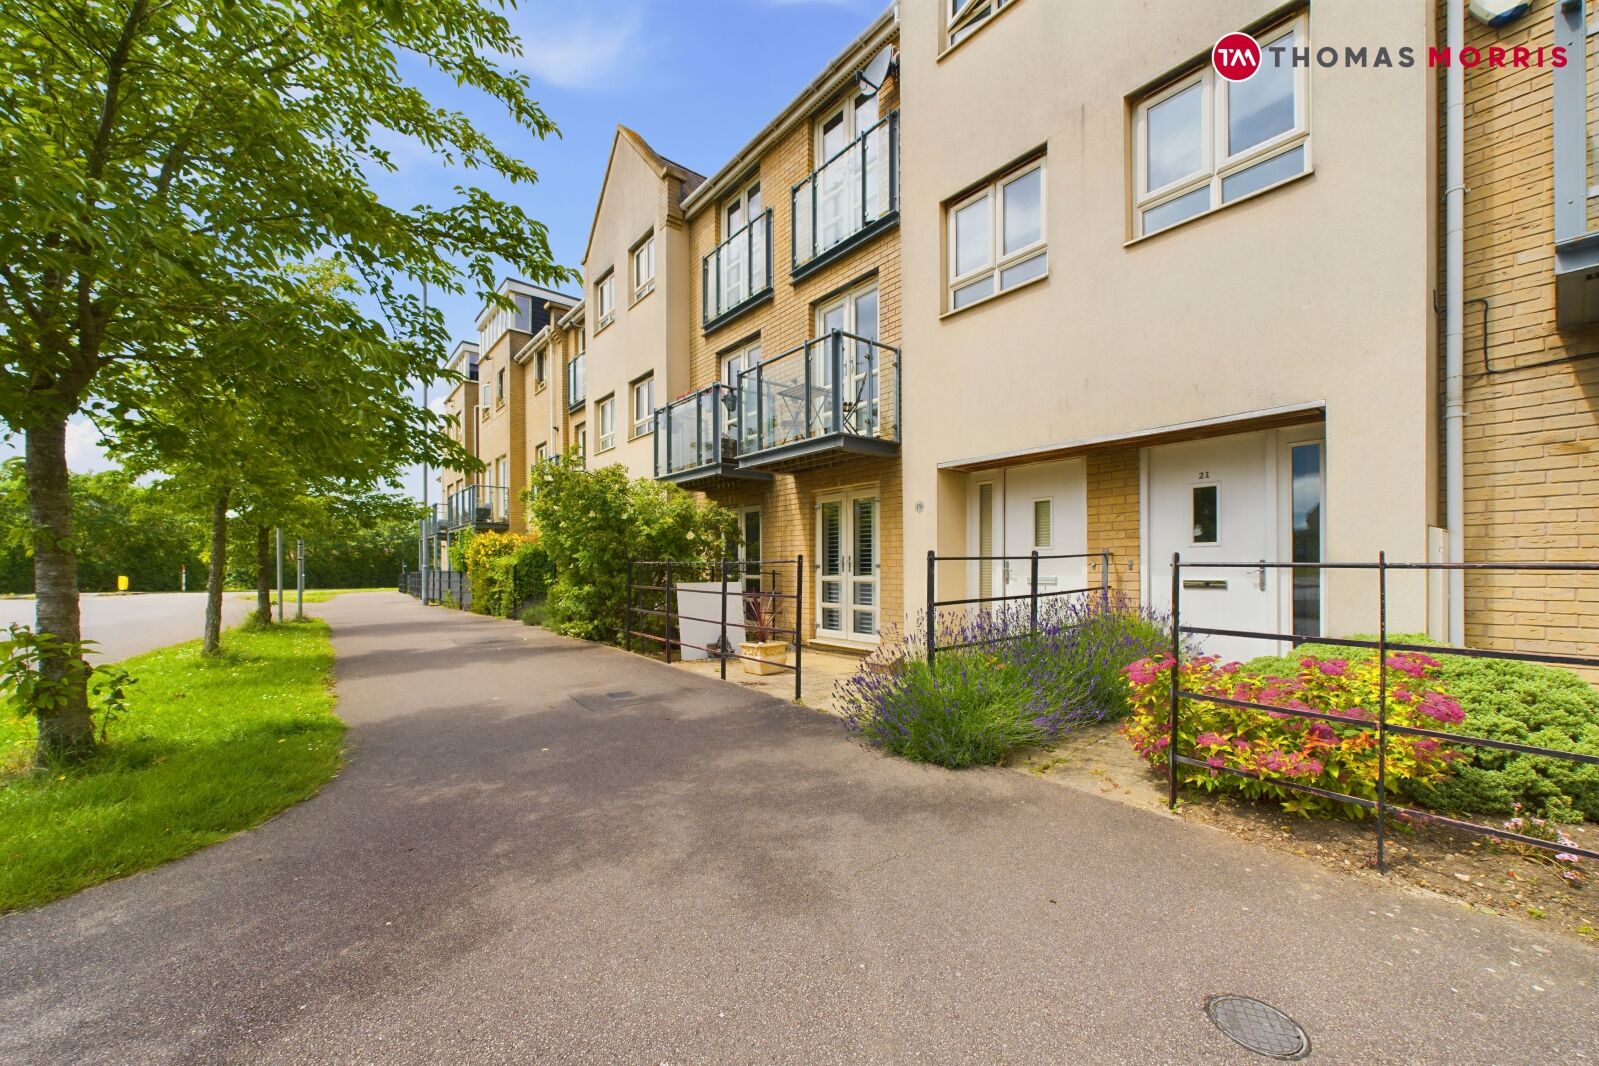 2 bedroom  flat for sale Stone Hill, St. Neots, PE19, main image